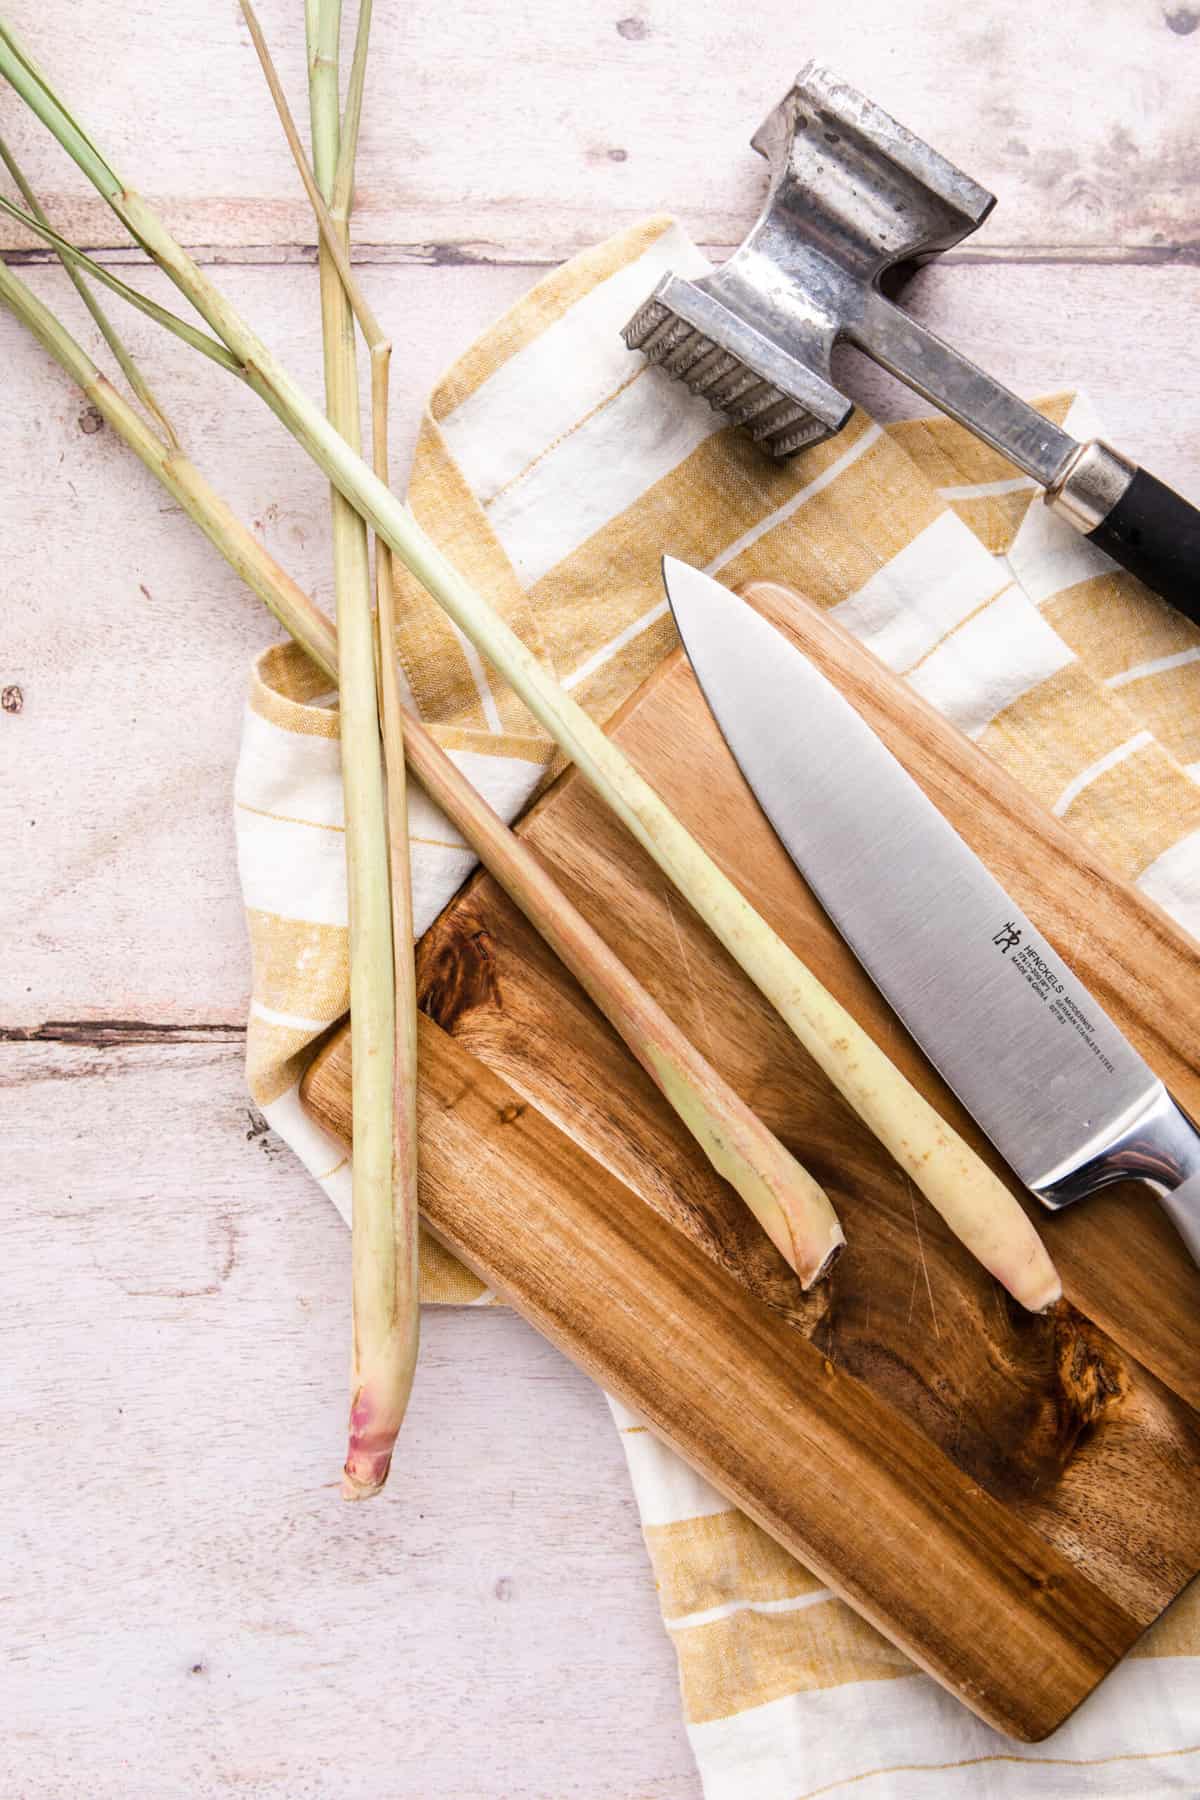 Chez Lalonde 3 lemongrass sitting on top of a wooden chopping board. Knife on the right hand side with a meat tenderizer on top right corner